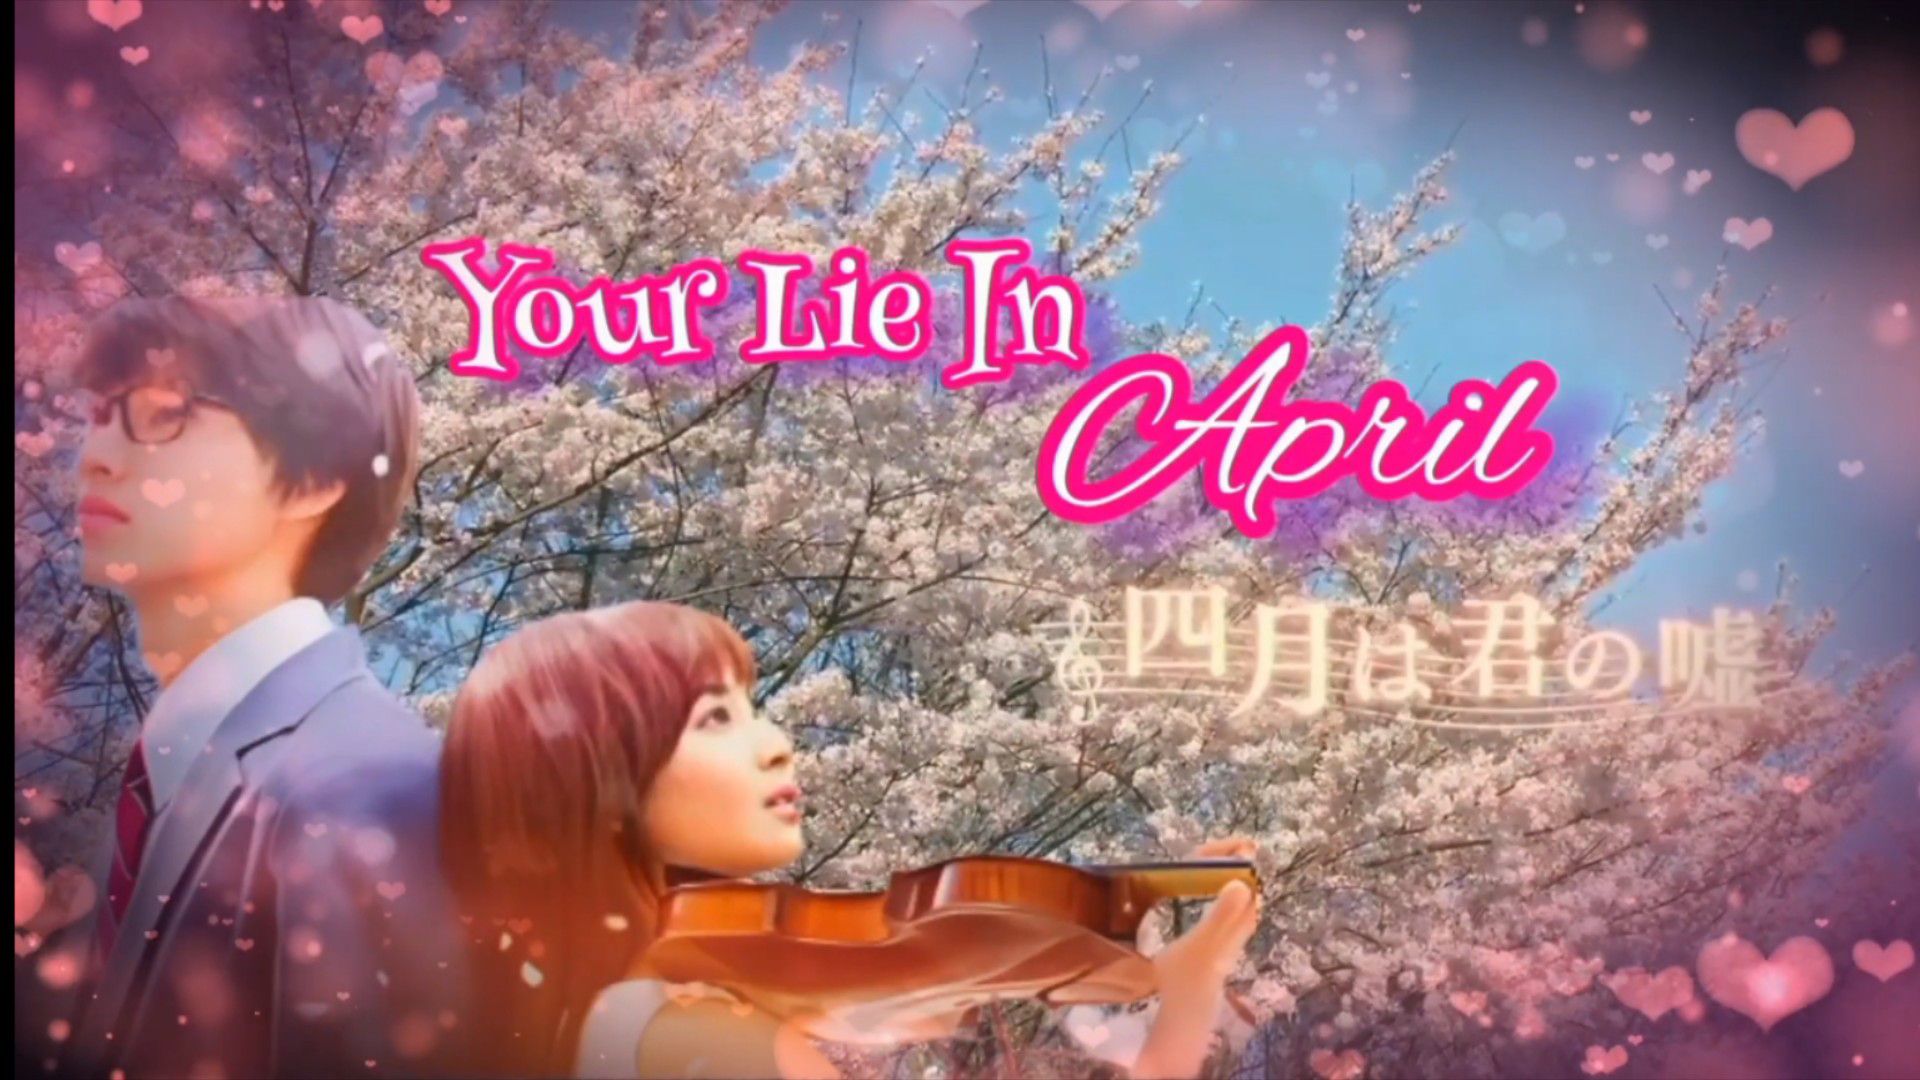 Your Lie in April Episode 1: From Monotone to Color – Beneath the Tangles